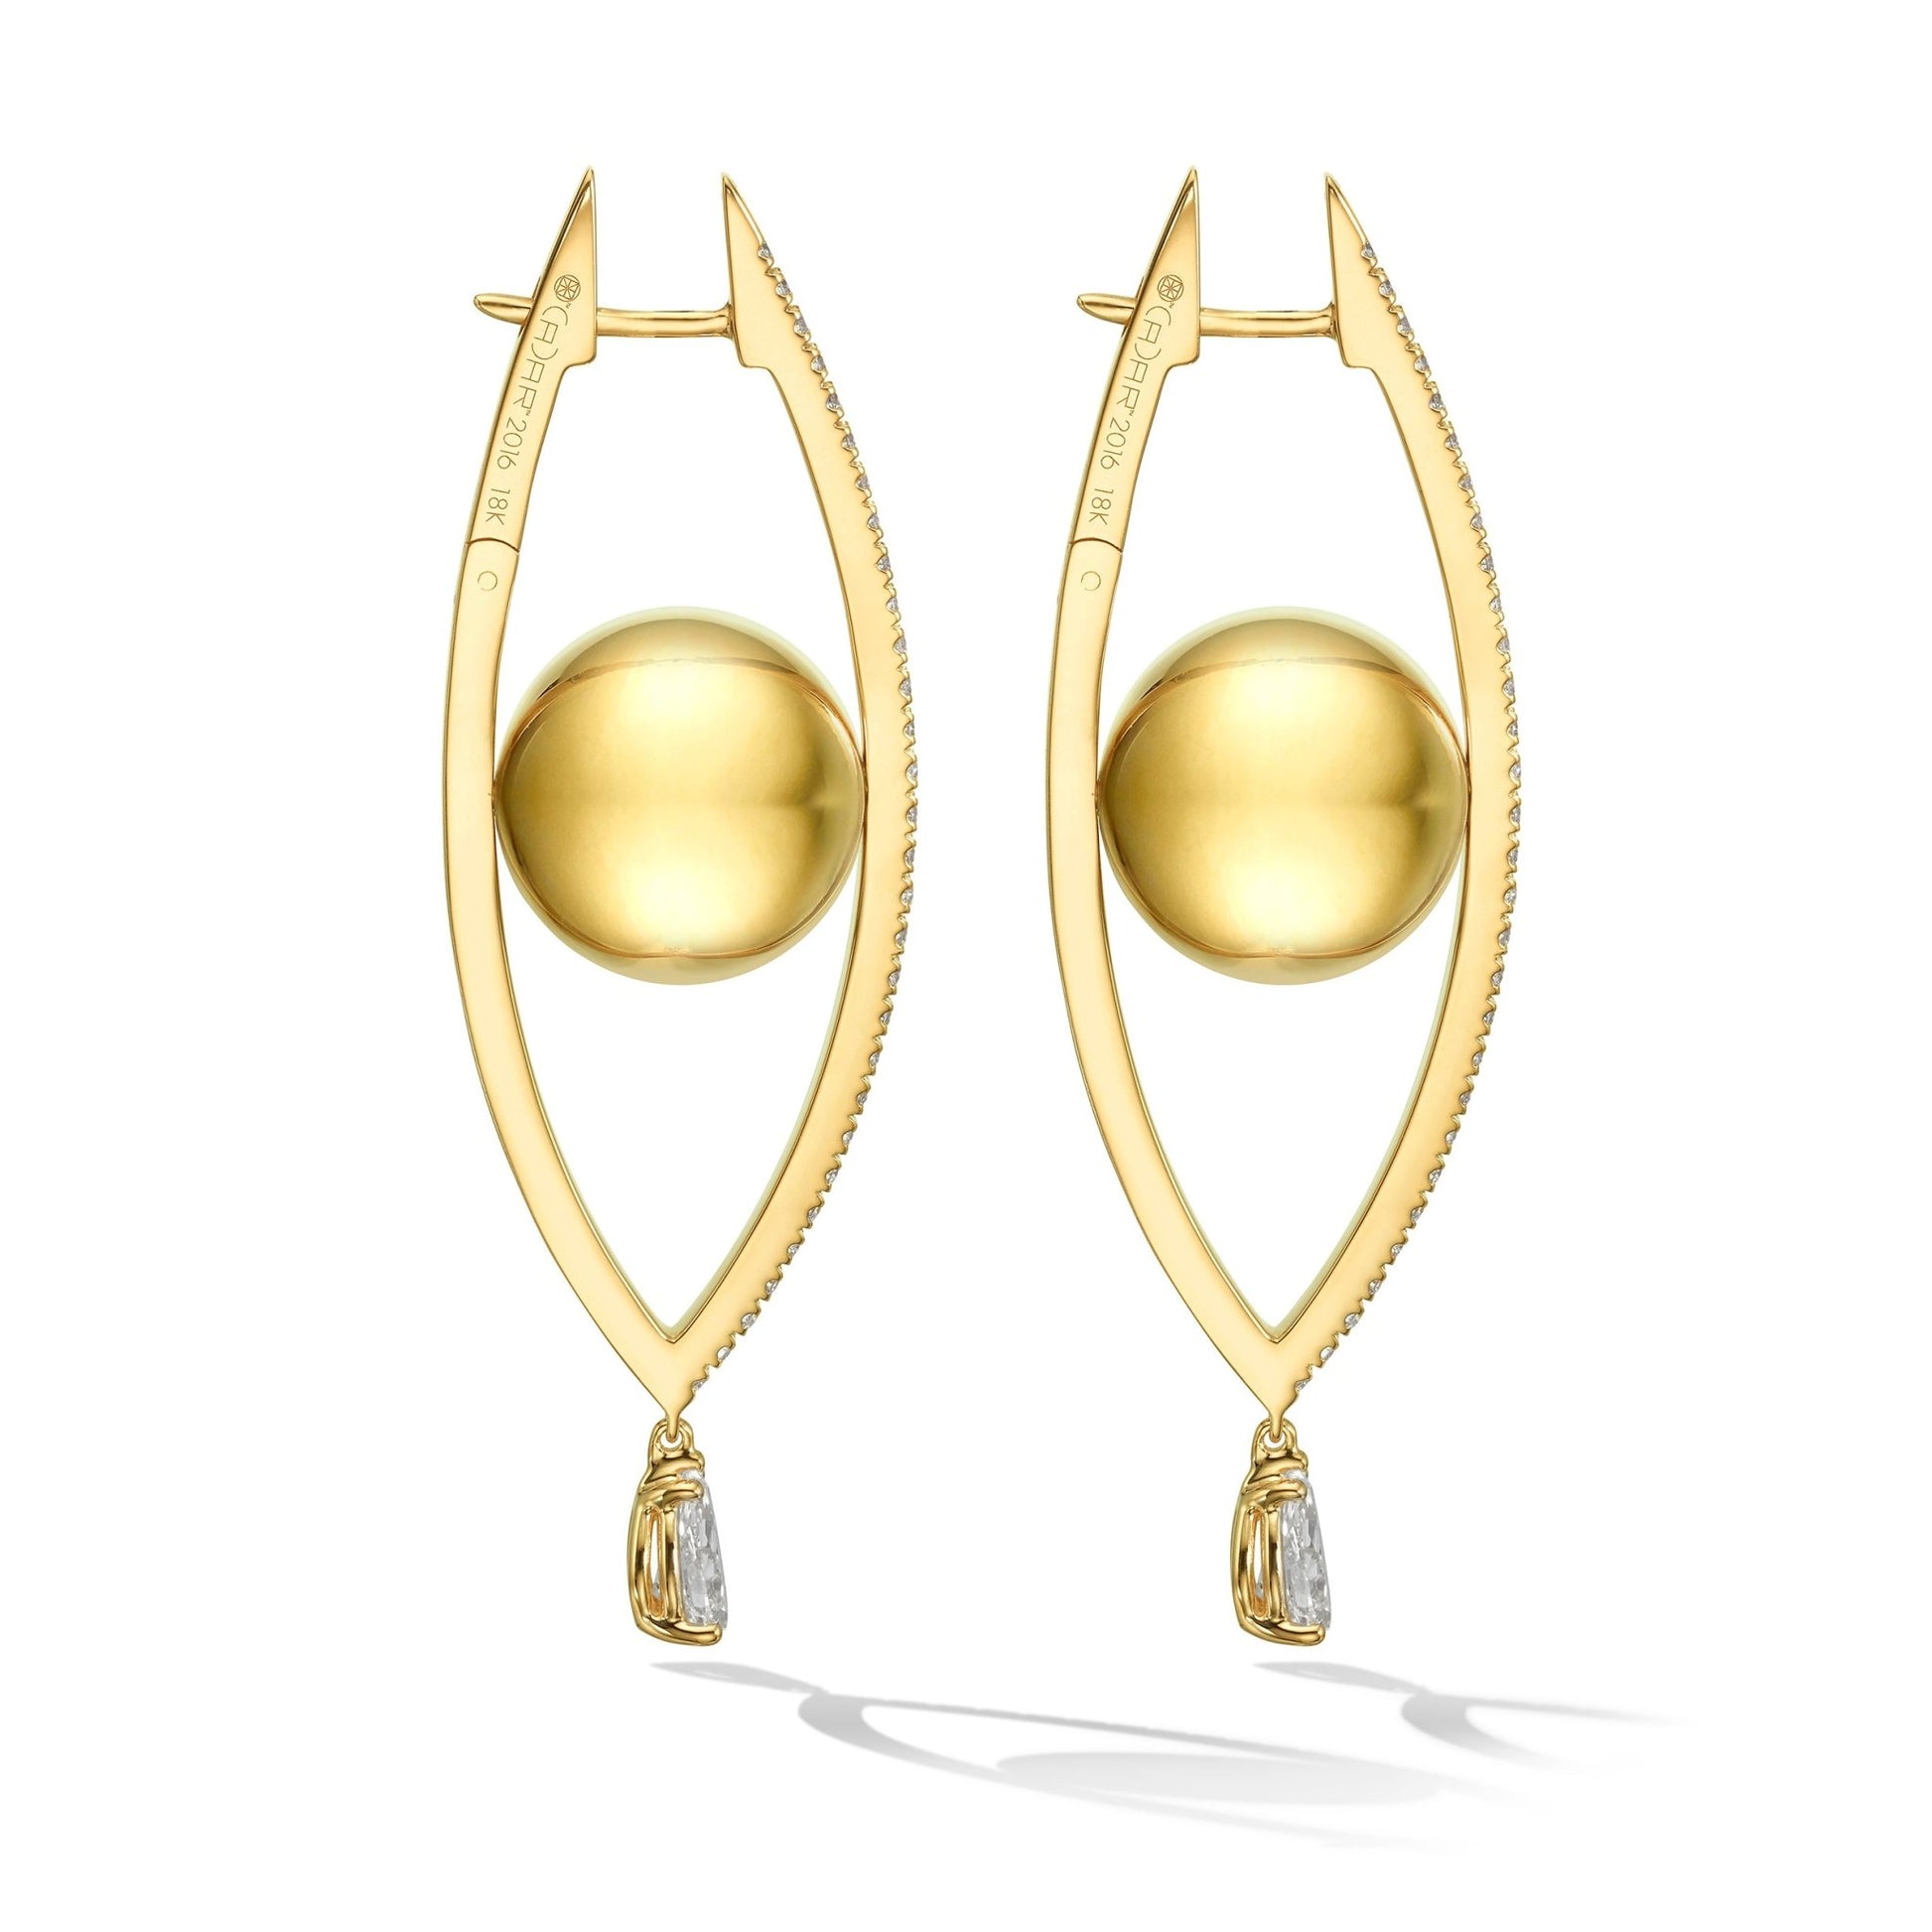 Large Yellow Gold Reflections Hoop Earrings with White Diamonds - Cadar